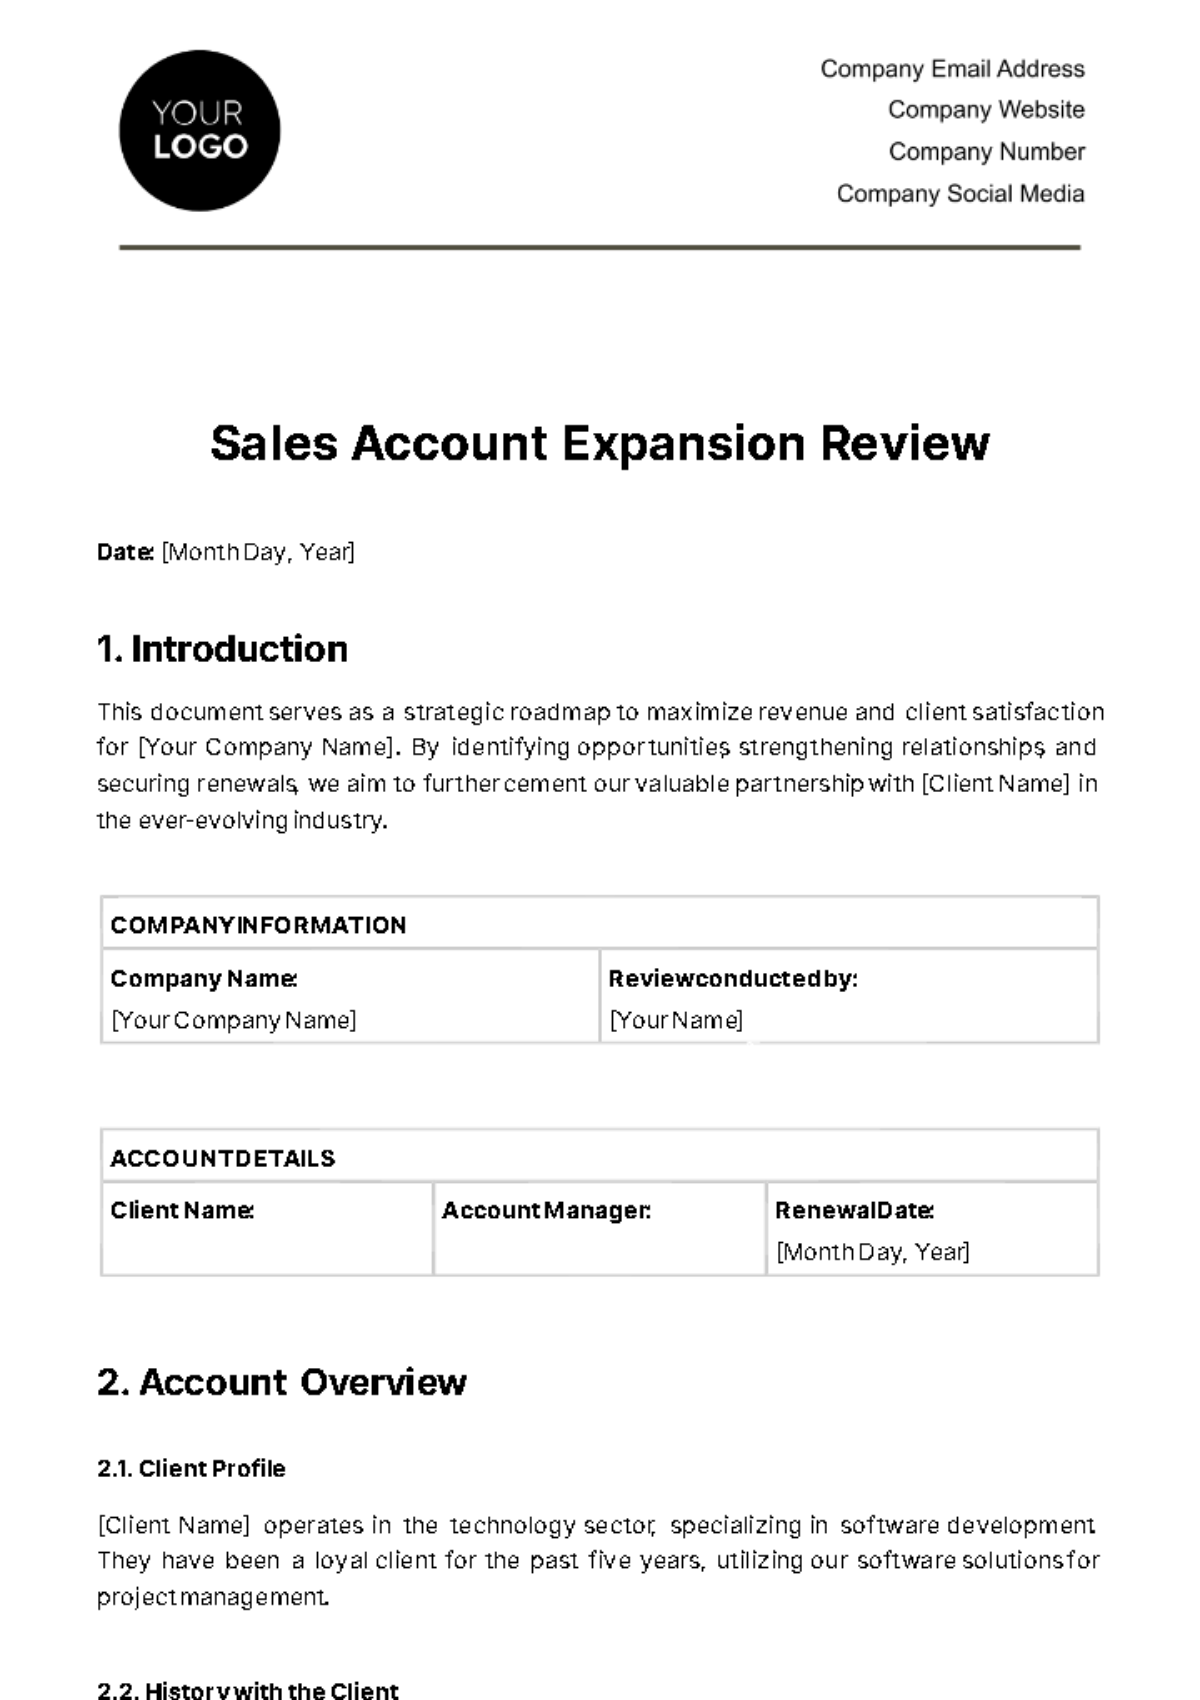 Sales Account Expansion Review Template